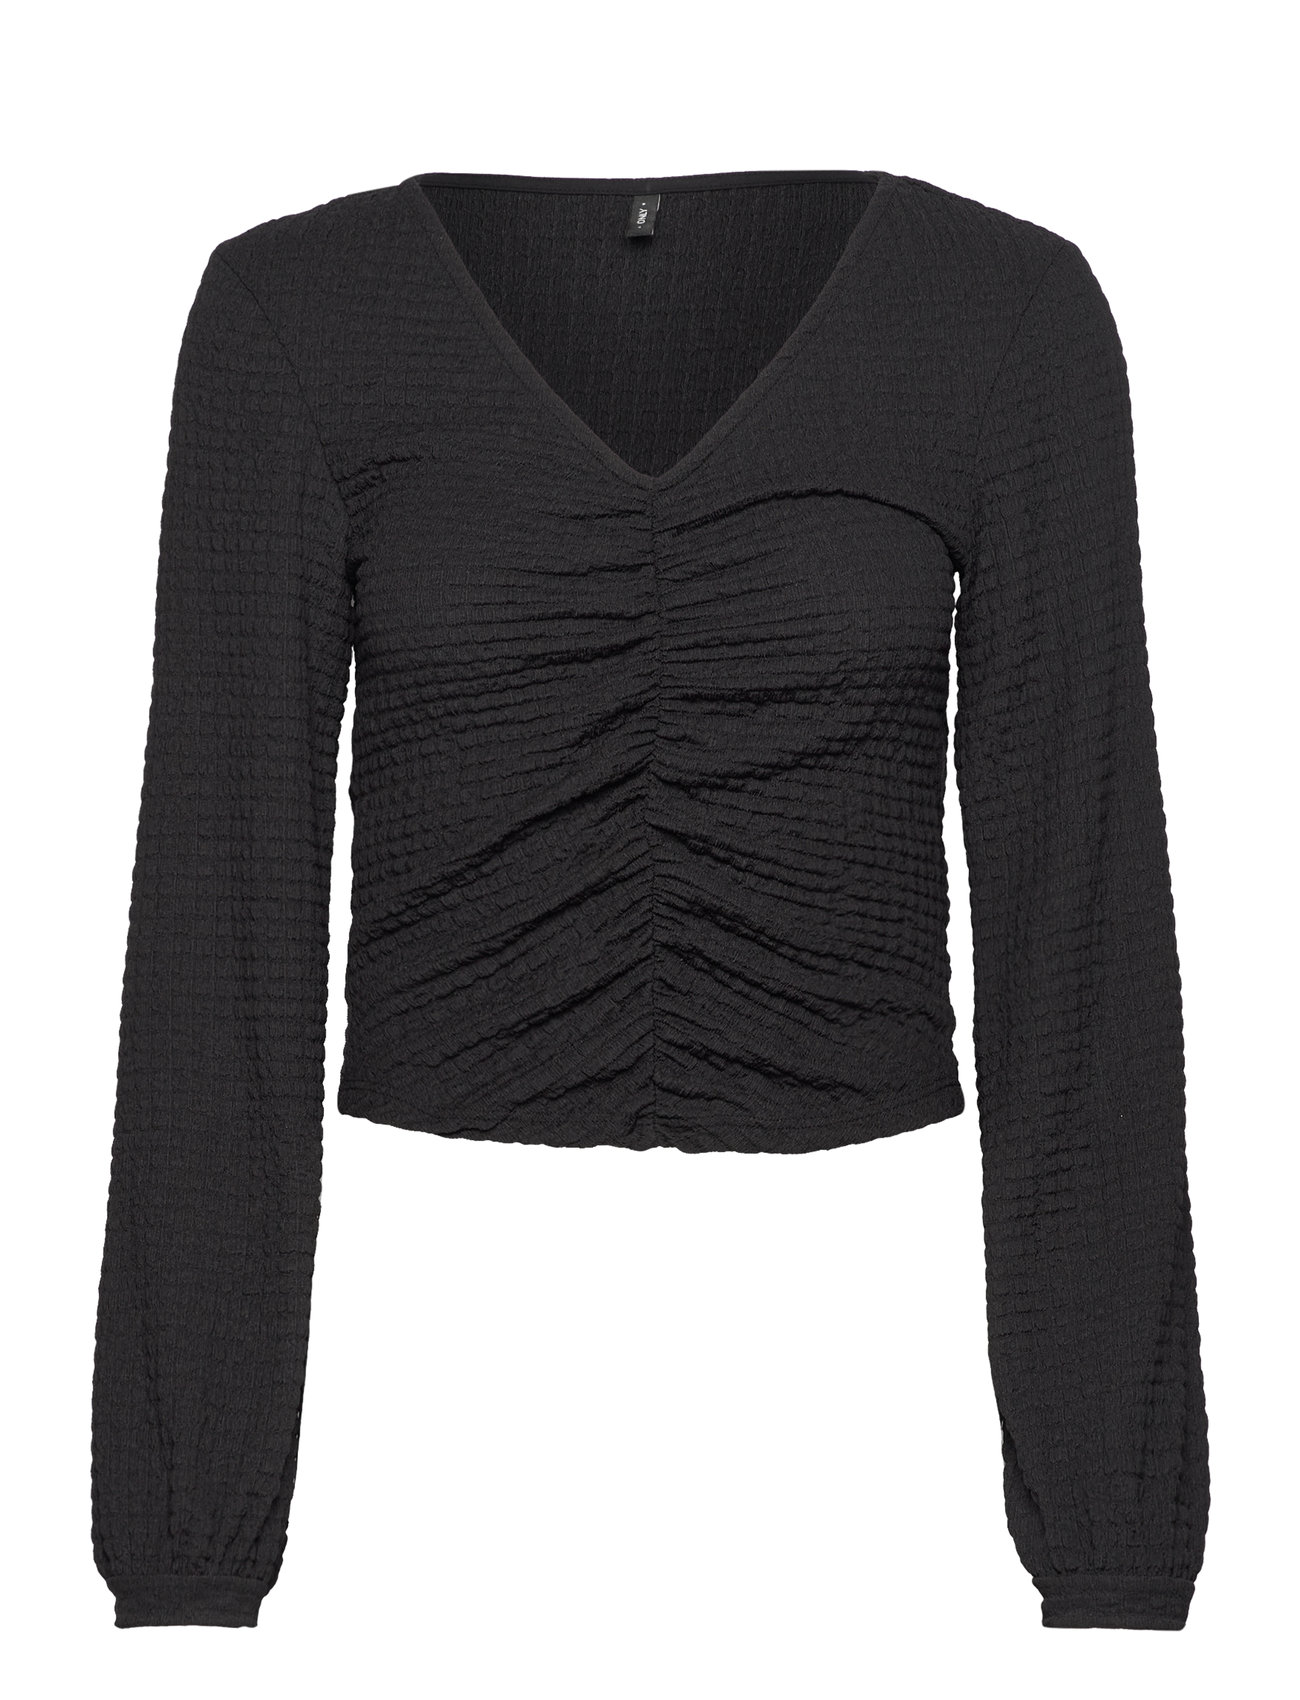 ONLY Onlmai Jrs L/s Cc tops - Top Long-sleeved Ruching